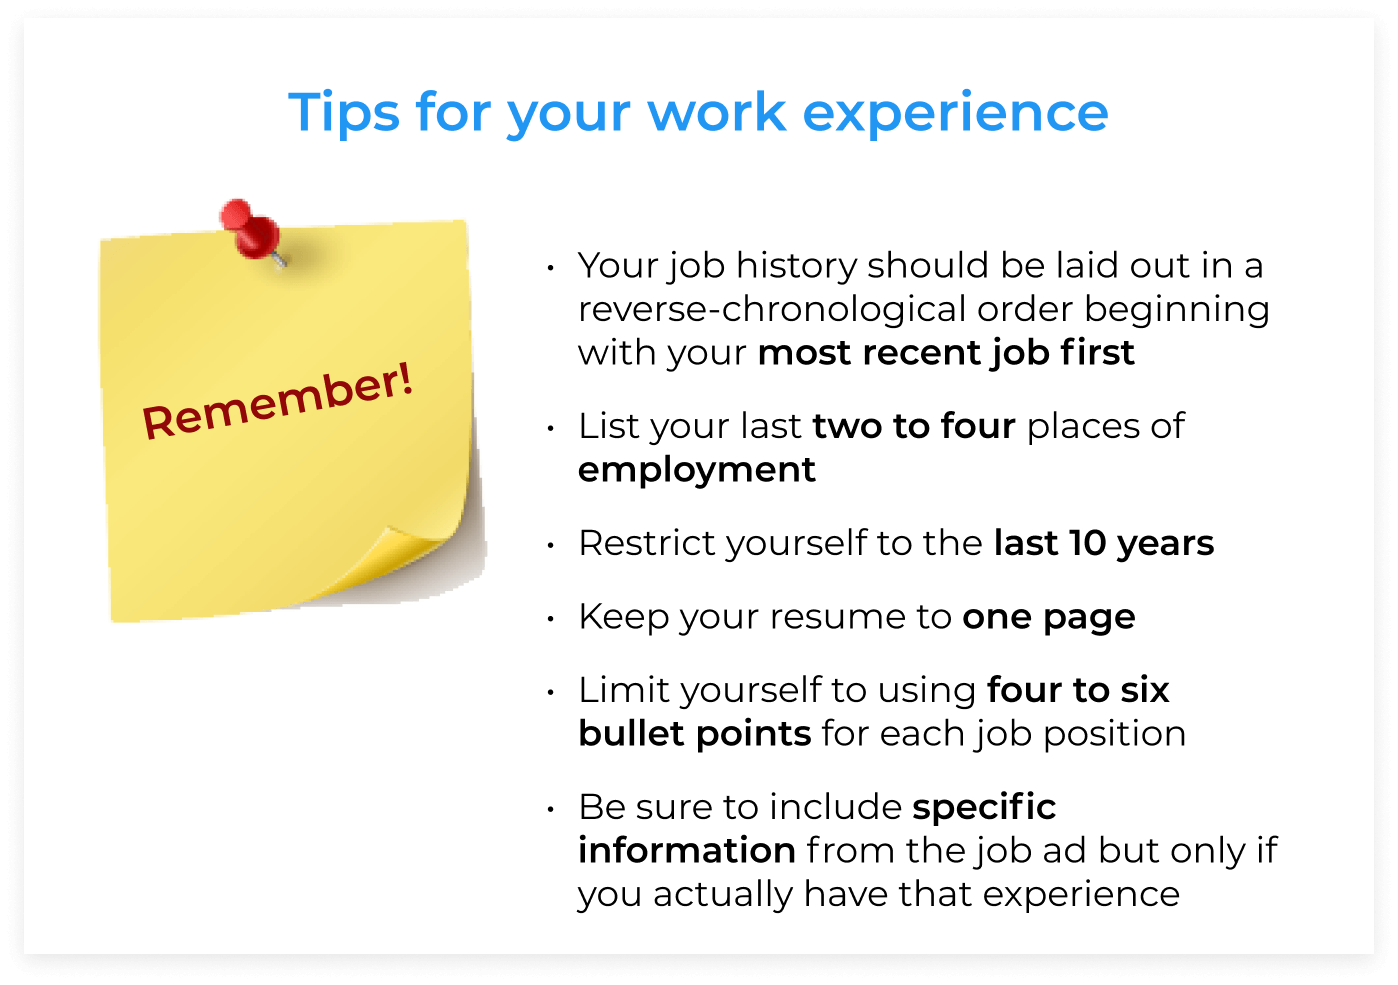 Tips for describing work experience on a resume